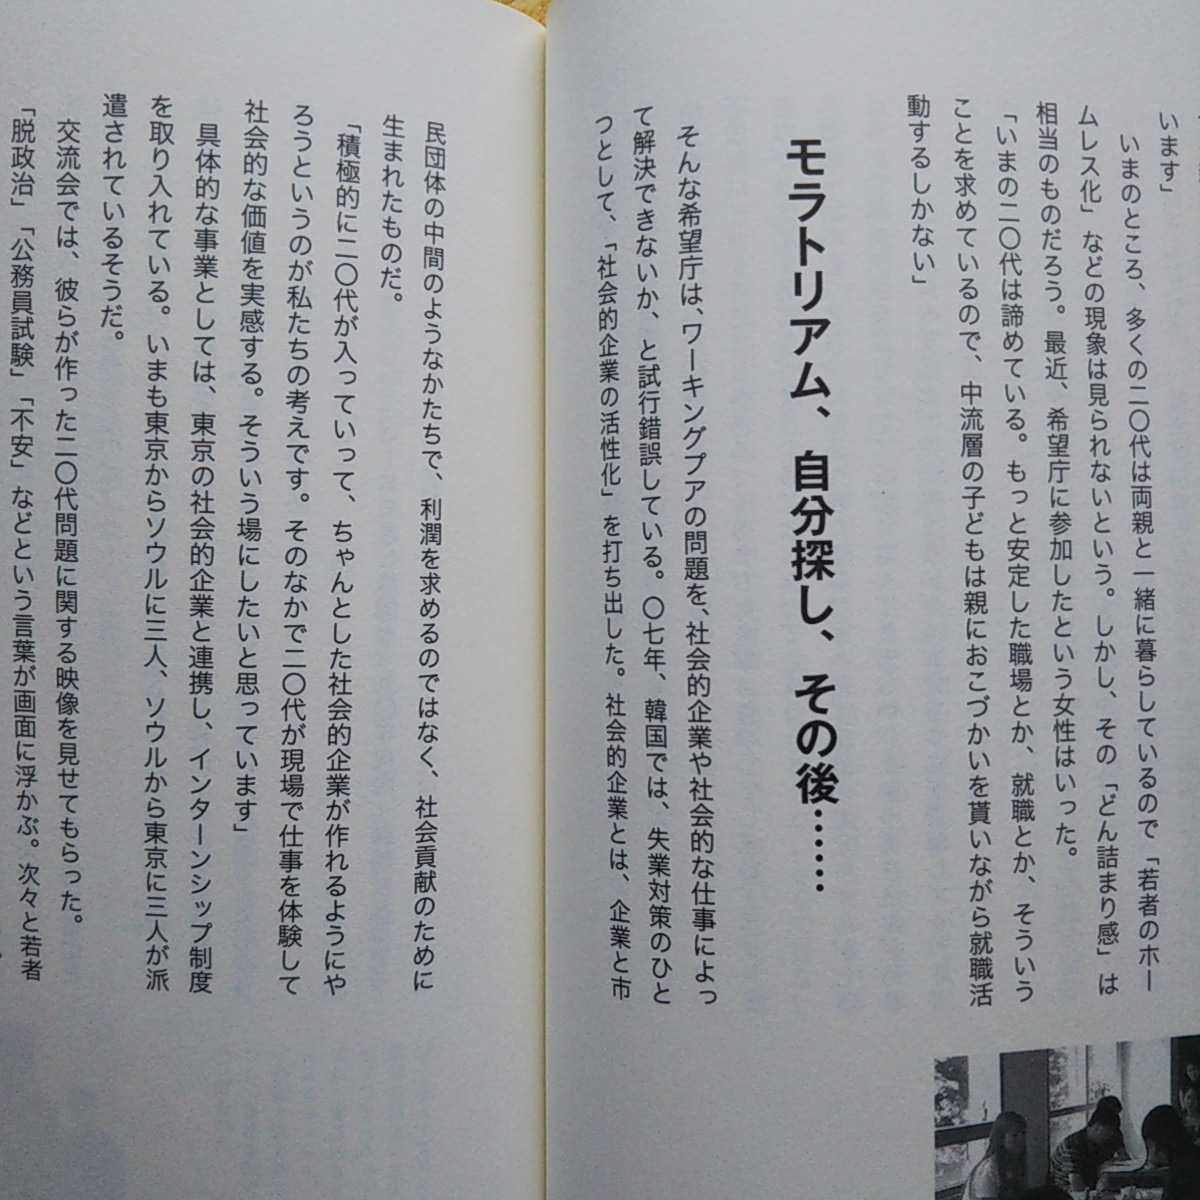 ... soul Japan and more. [. difference society ]. raw .. Korea corporation Friday issue issue person . height confidence Amemiya place . work 